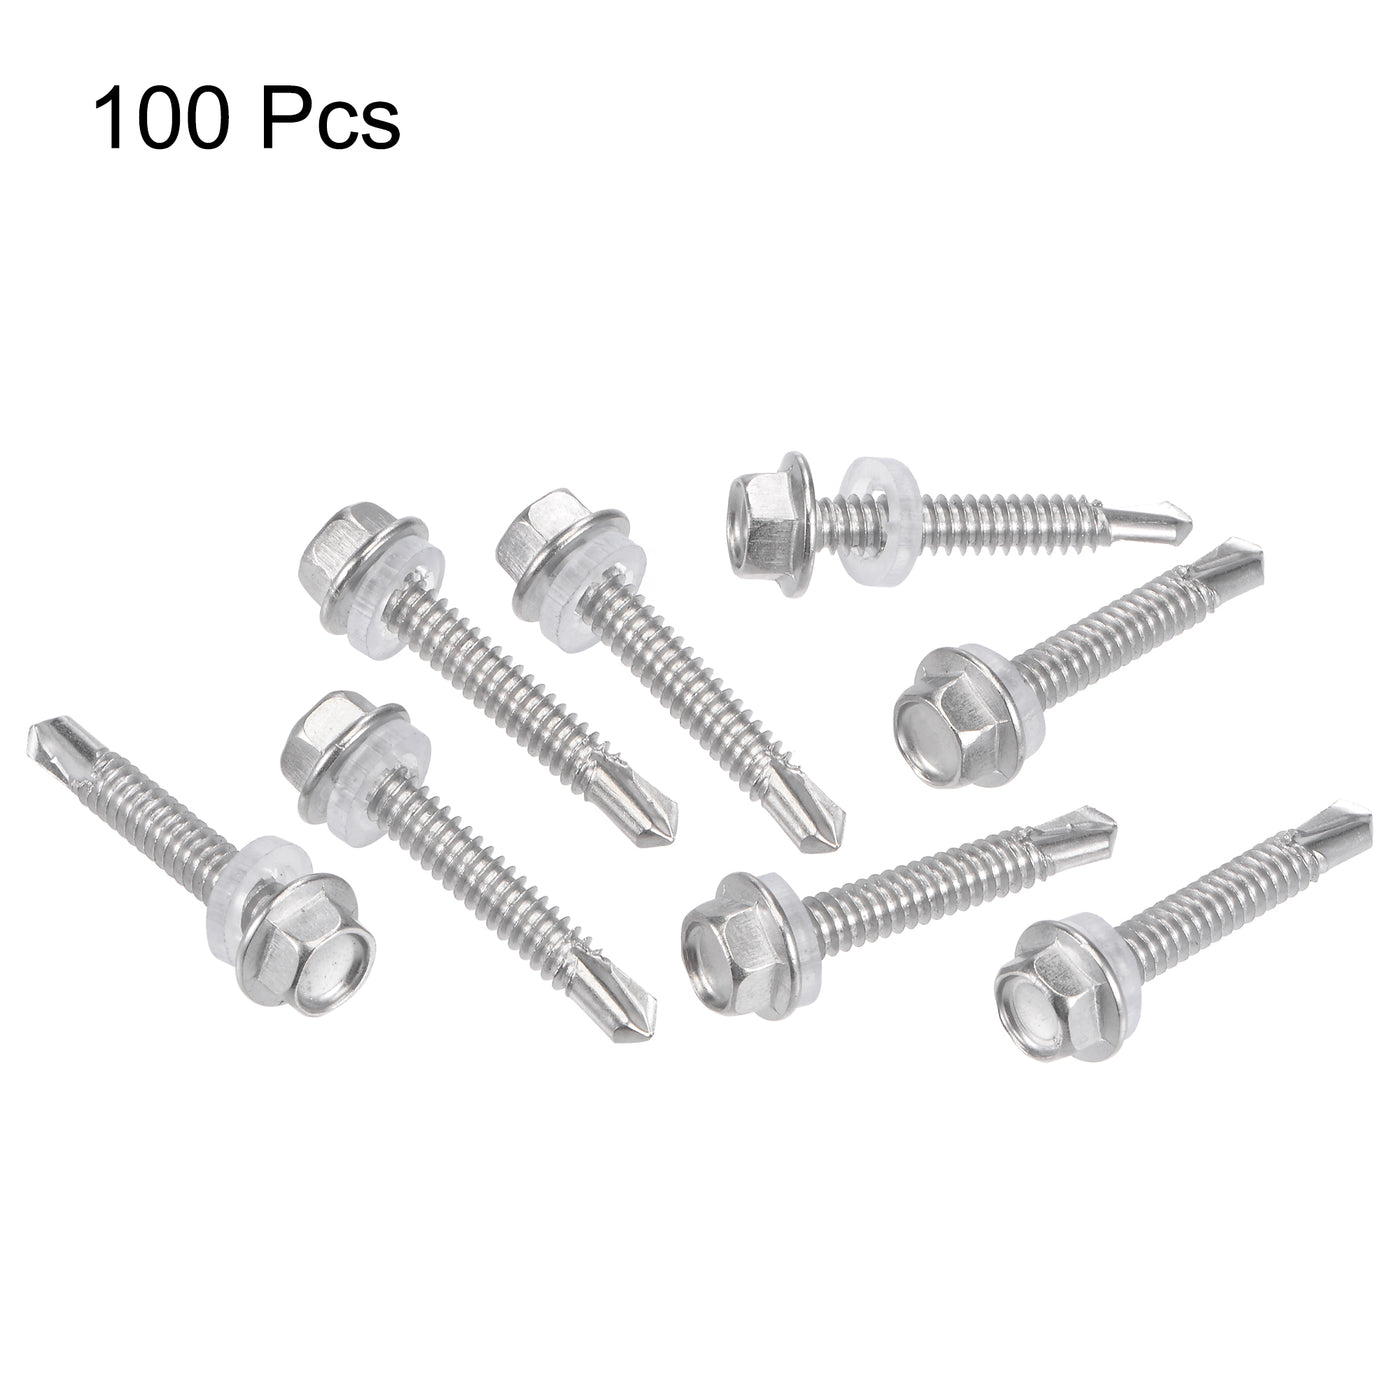 uxcell Uxcell #12 x 1 17/64" 410 Stainless Steel Hex Washer Head Self Drilling Screws 100pcs